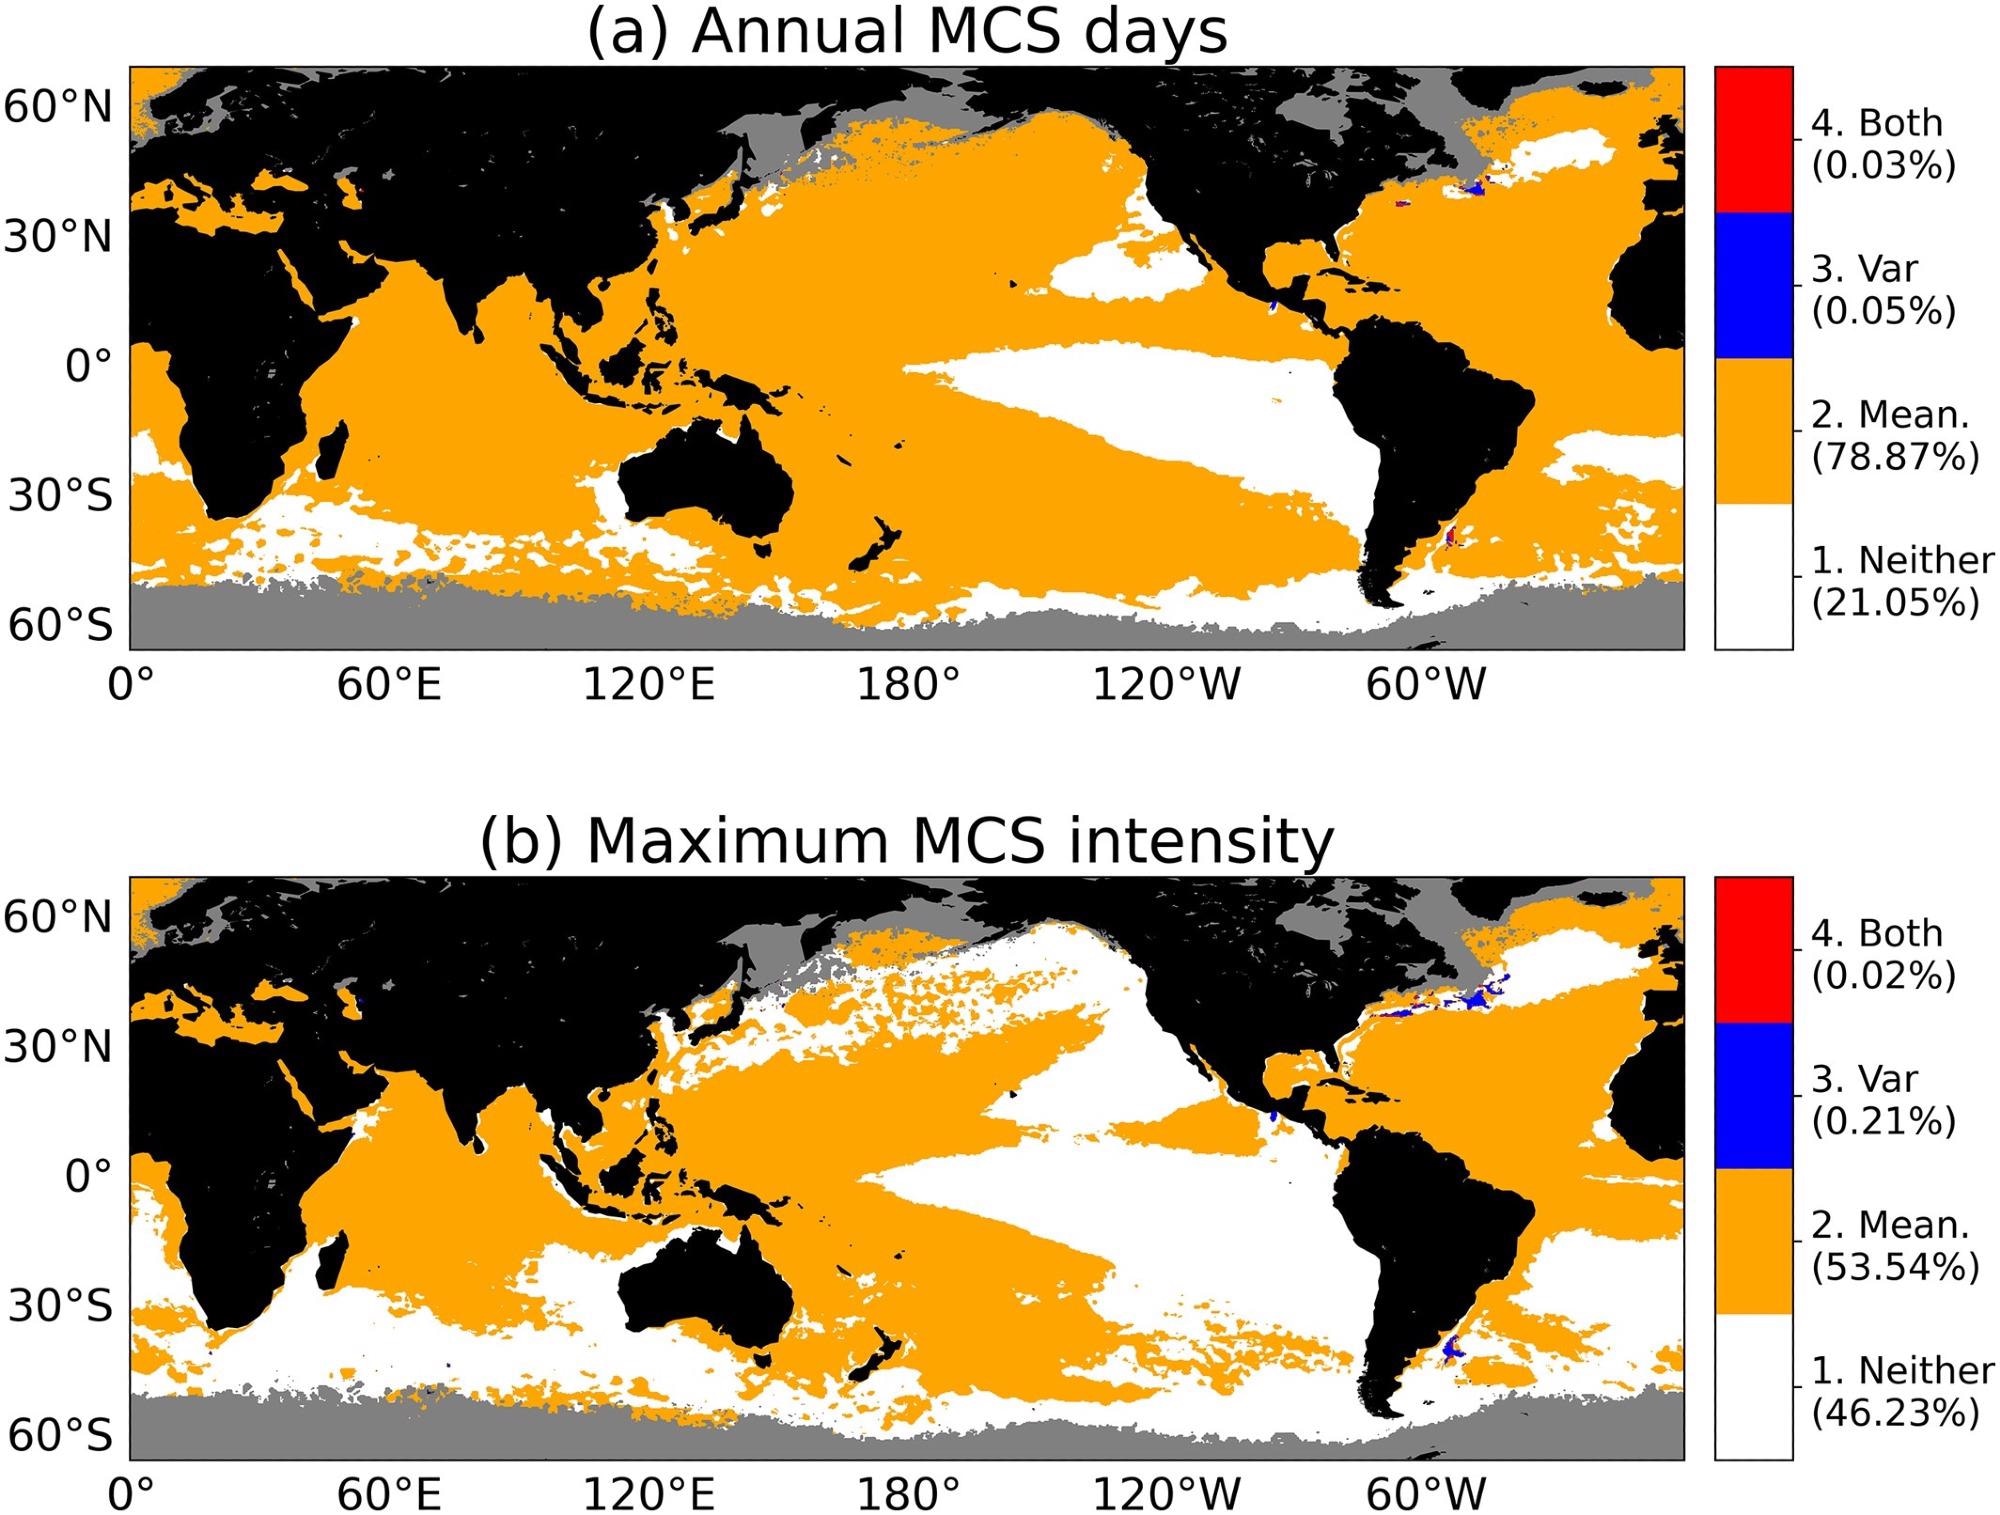 The relative importance of trends in sea surface temperature (SST) and SST variance in driving changes in marine cold spells (MCS) annual days and maximum intensity. Colors indicate whether trends in MCS (a) annual days and (b) maximum intensity are dominated by trends in SST and/or SST variance. Four situation types are shown: ‘neither’ (white), ‘mean-dominant’ (orange), ‘variance-dominant’ (blue), and ‘both’ (red). The proportion of the globe covered by each type is quoted beside in the color bar. Both subplots are derived from National Oceanic and Atmospheric Administration Optimal Interpolation SST from 1982 to 2020.